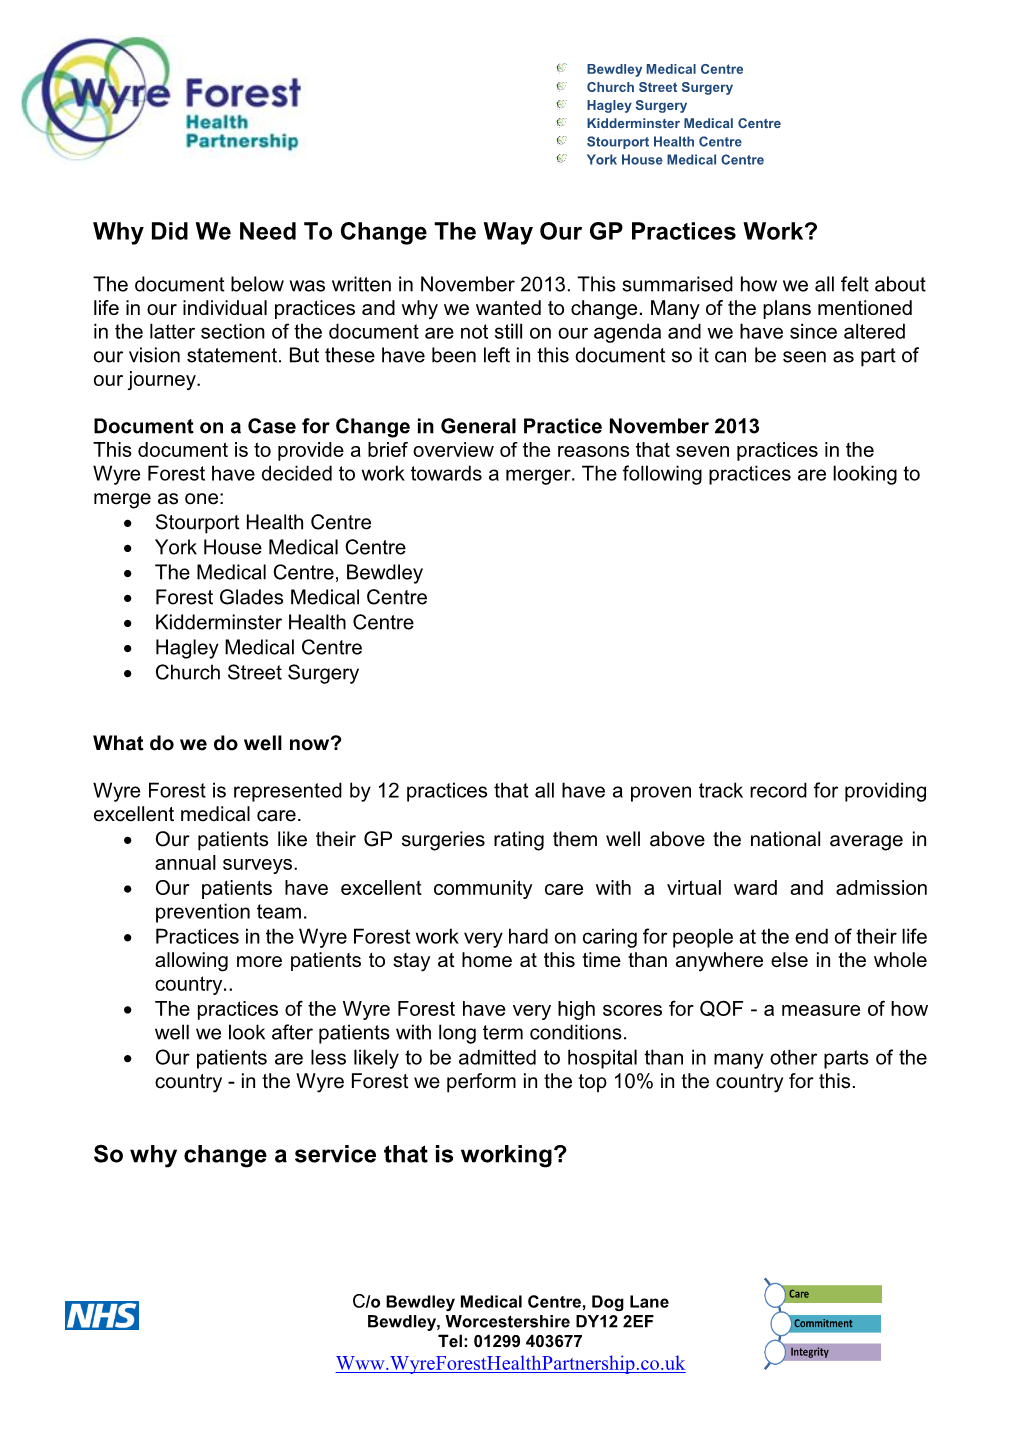 Why Did We Need to Change the Way Our GP Practices Work?